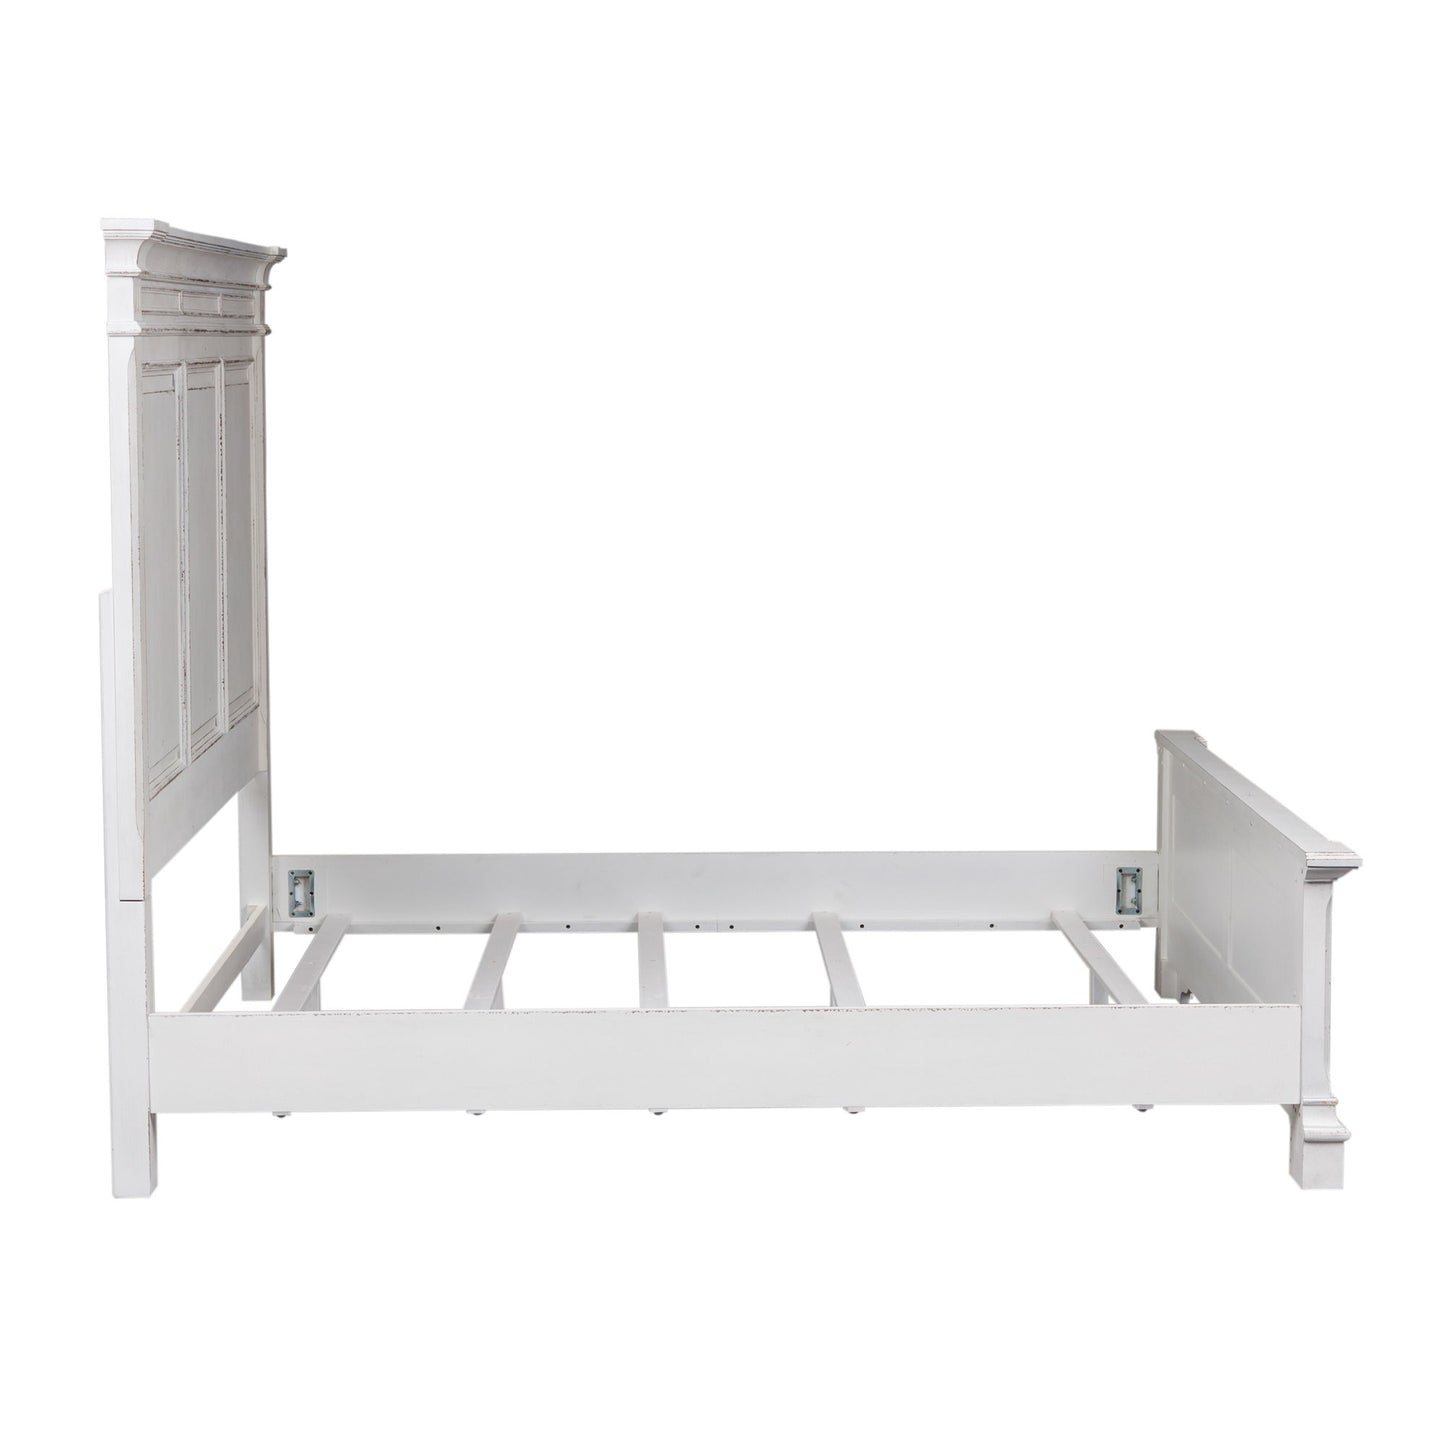 Abbey Park - California King Panel Bed - White